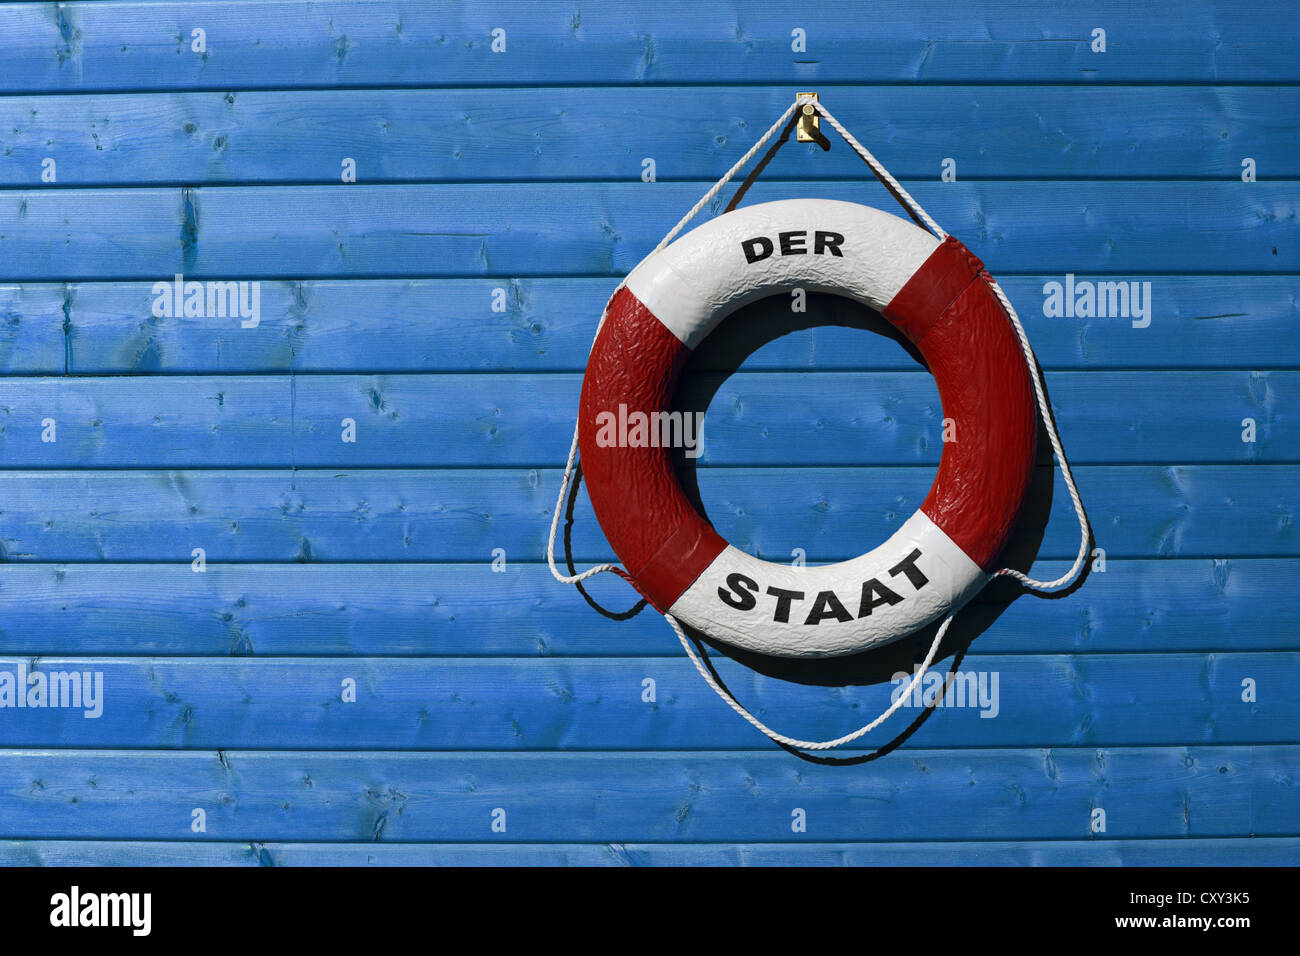 Life ring labelled Der Staat, German for the nation, hanging on a blue wooden wall Stock Photo